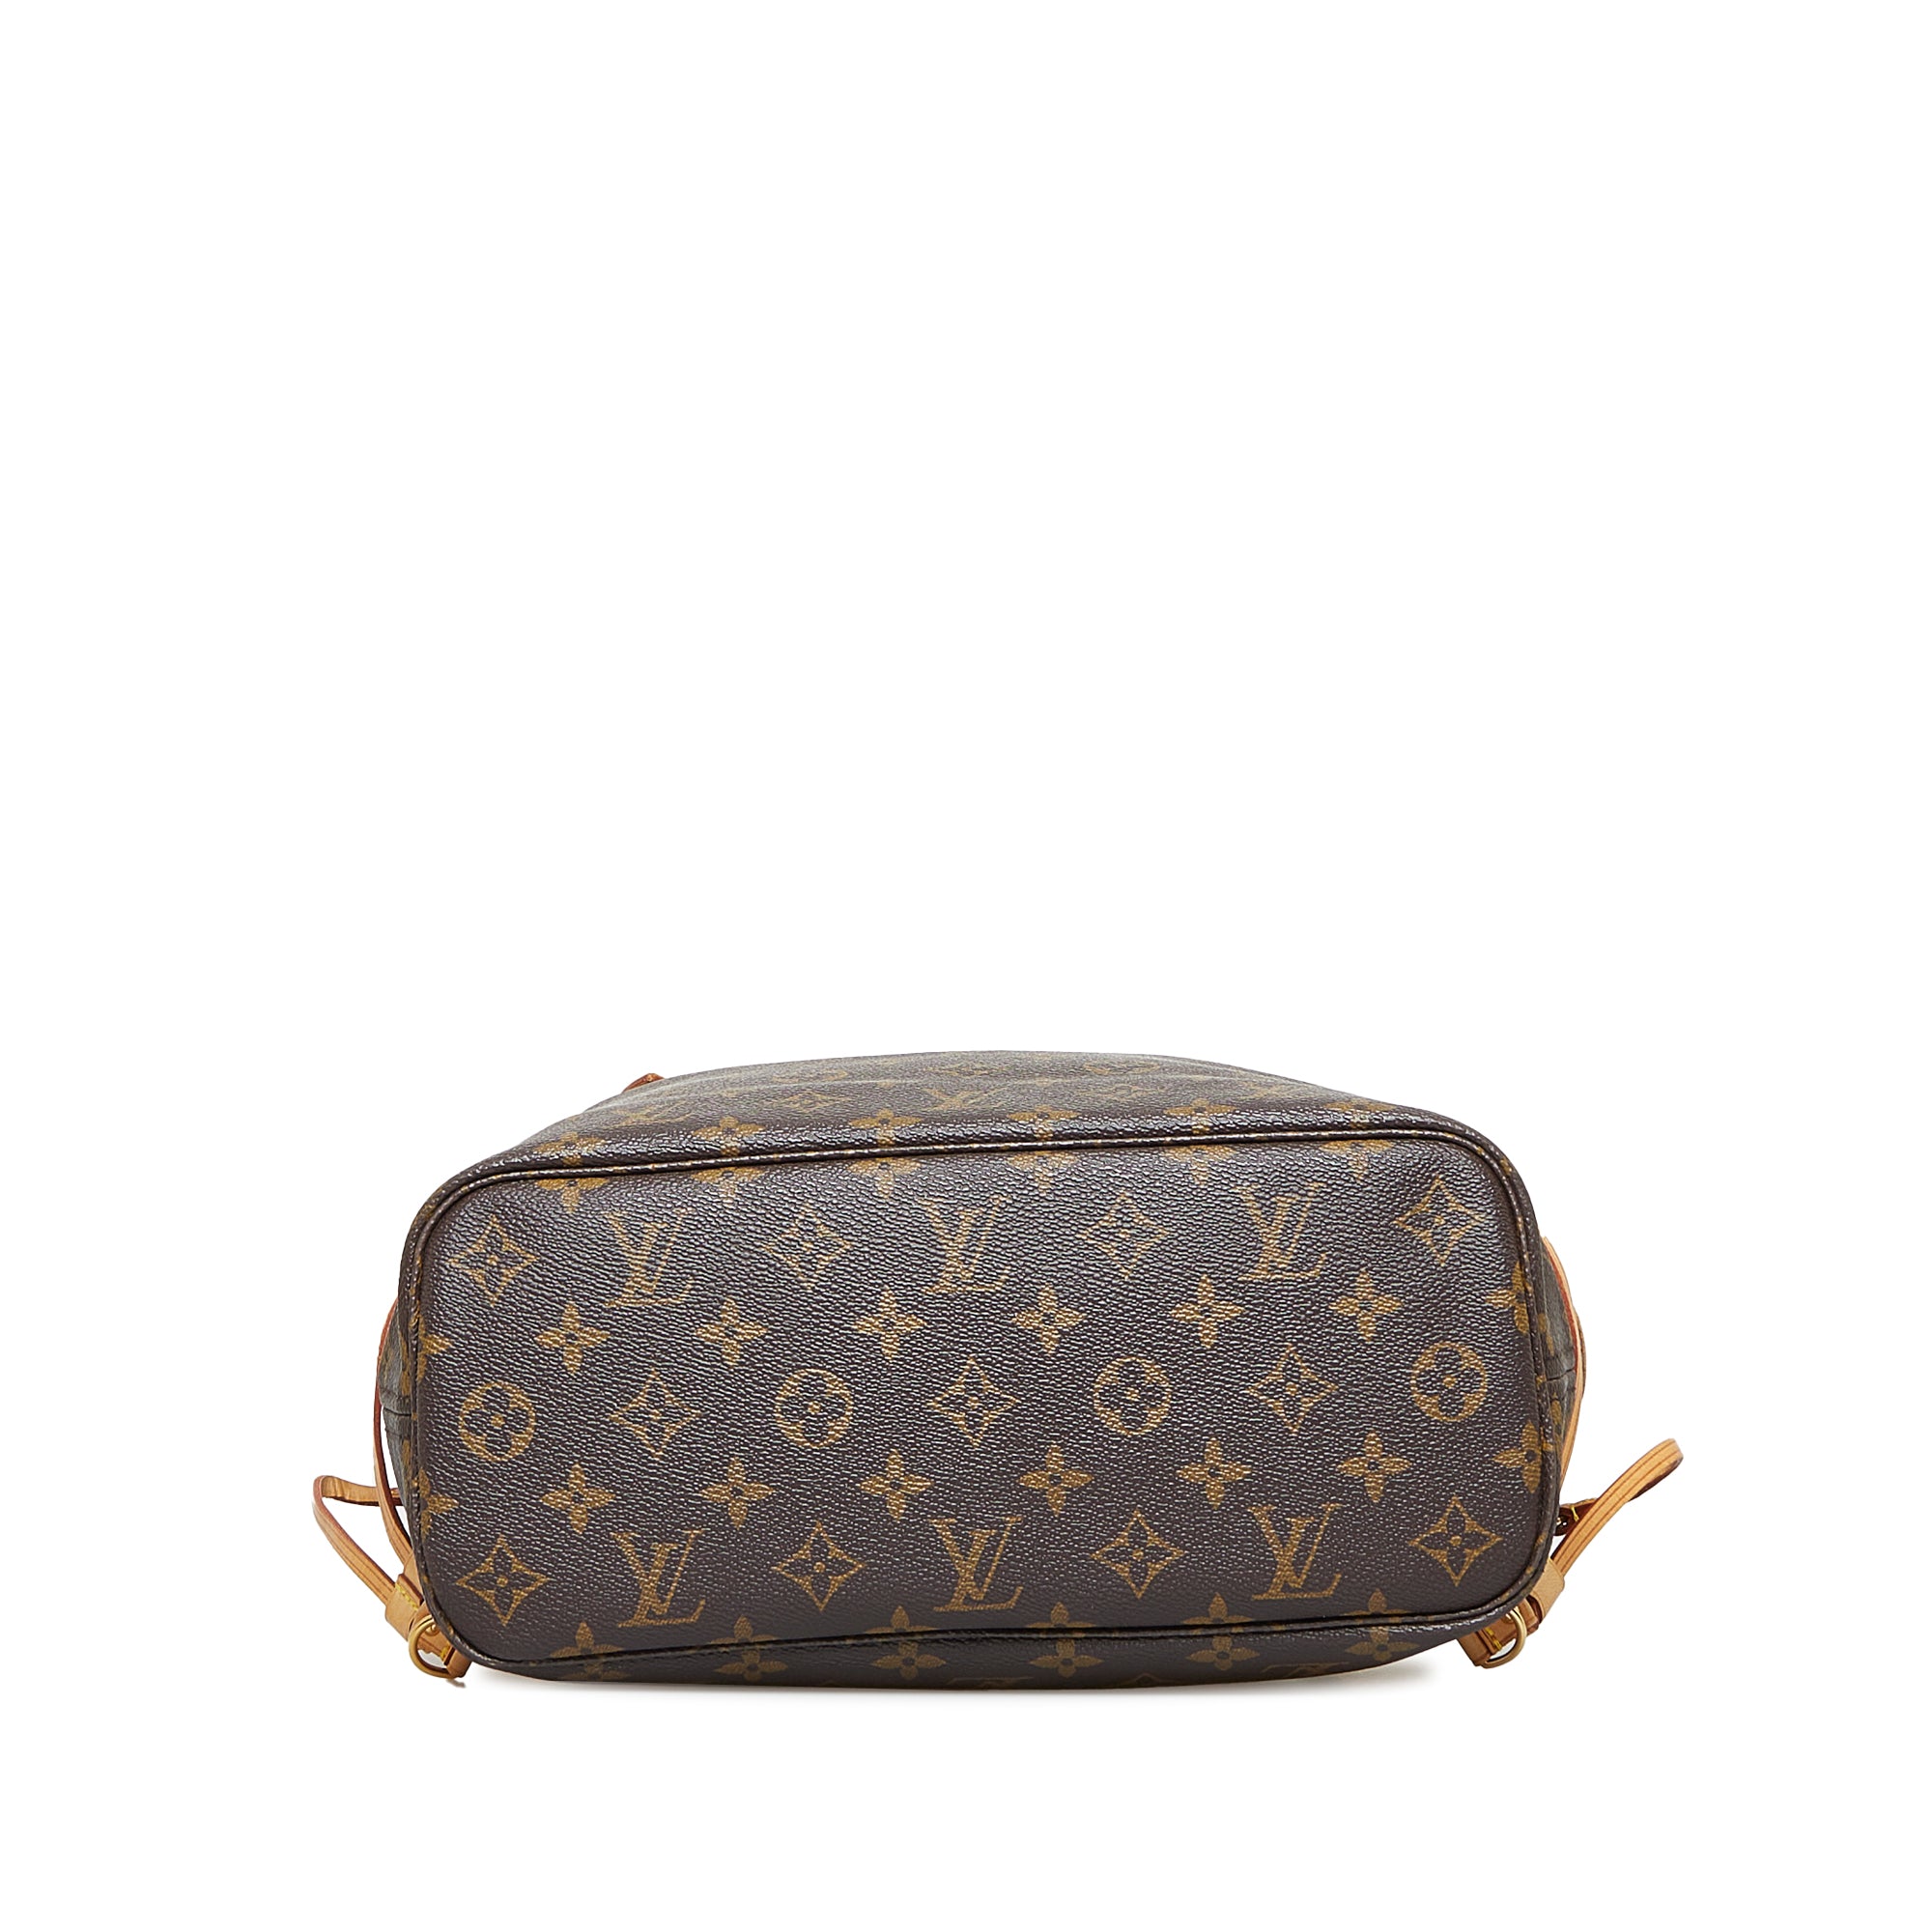 LOUIS VUITTON LV Heritage Neverfull PM Monogram Canvas Tote Bag Brown